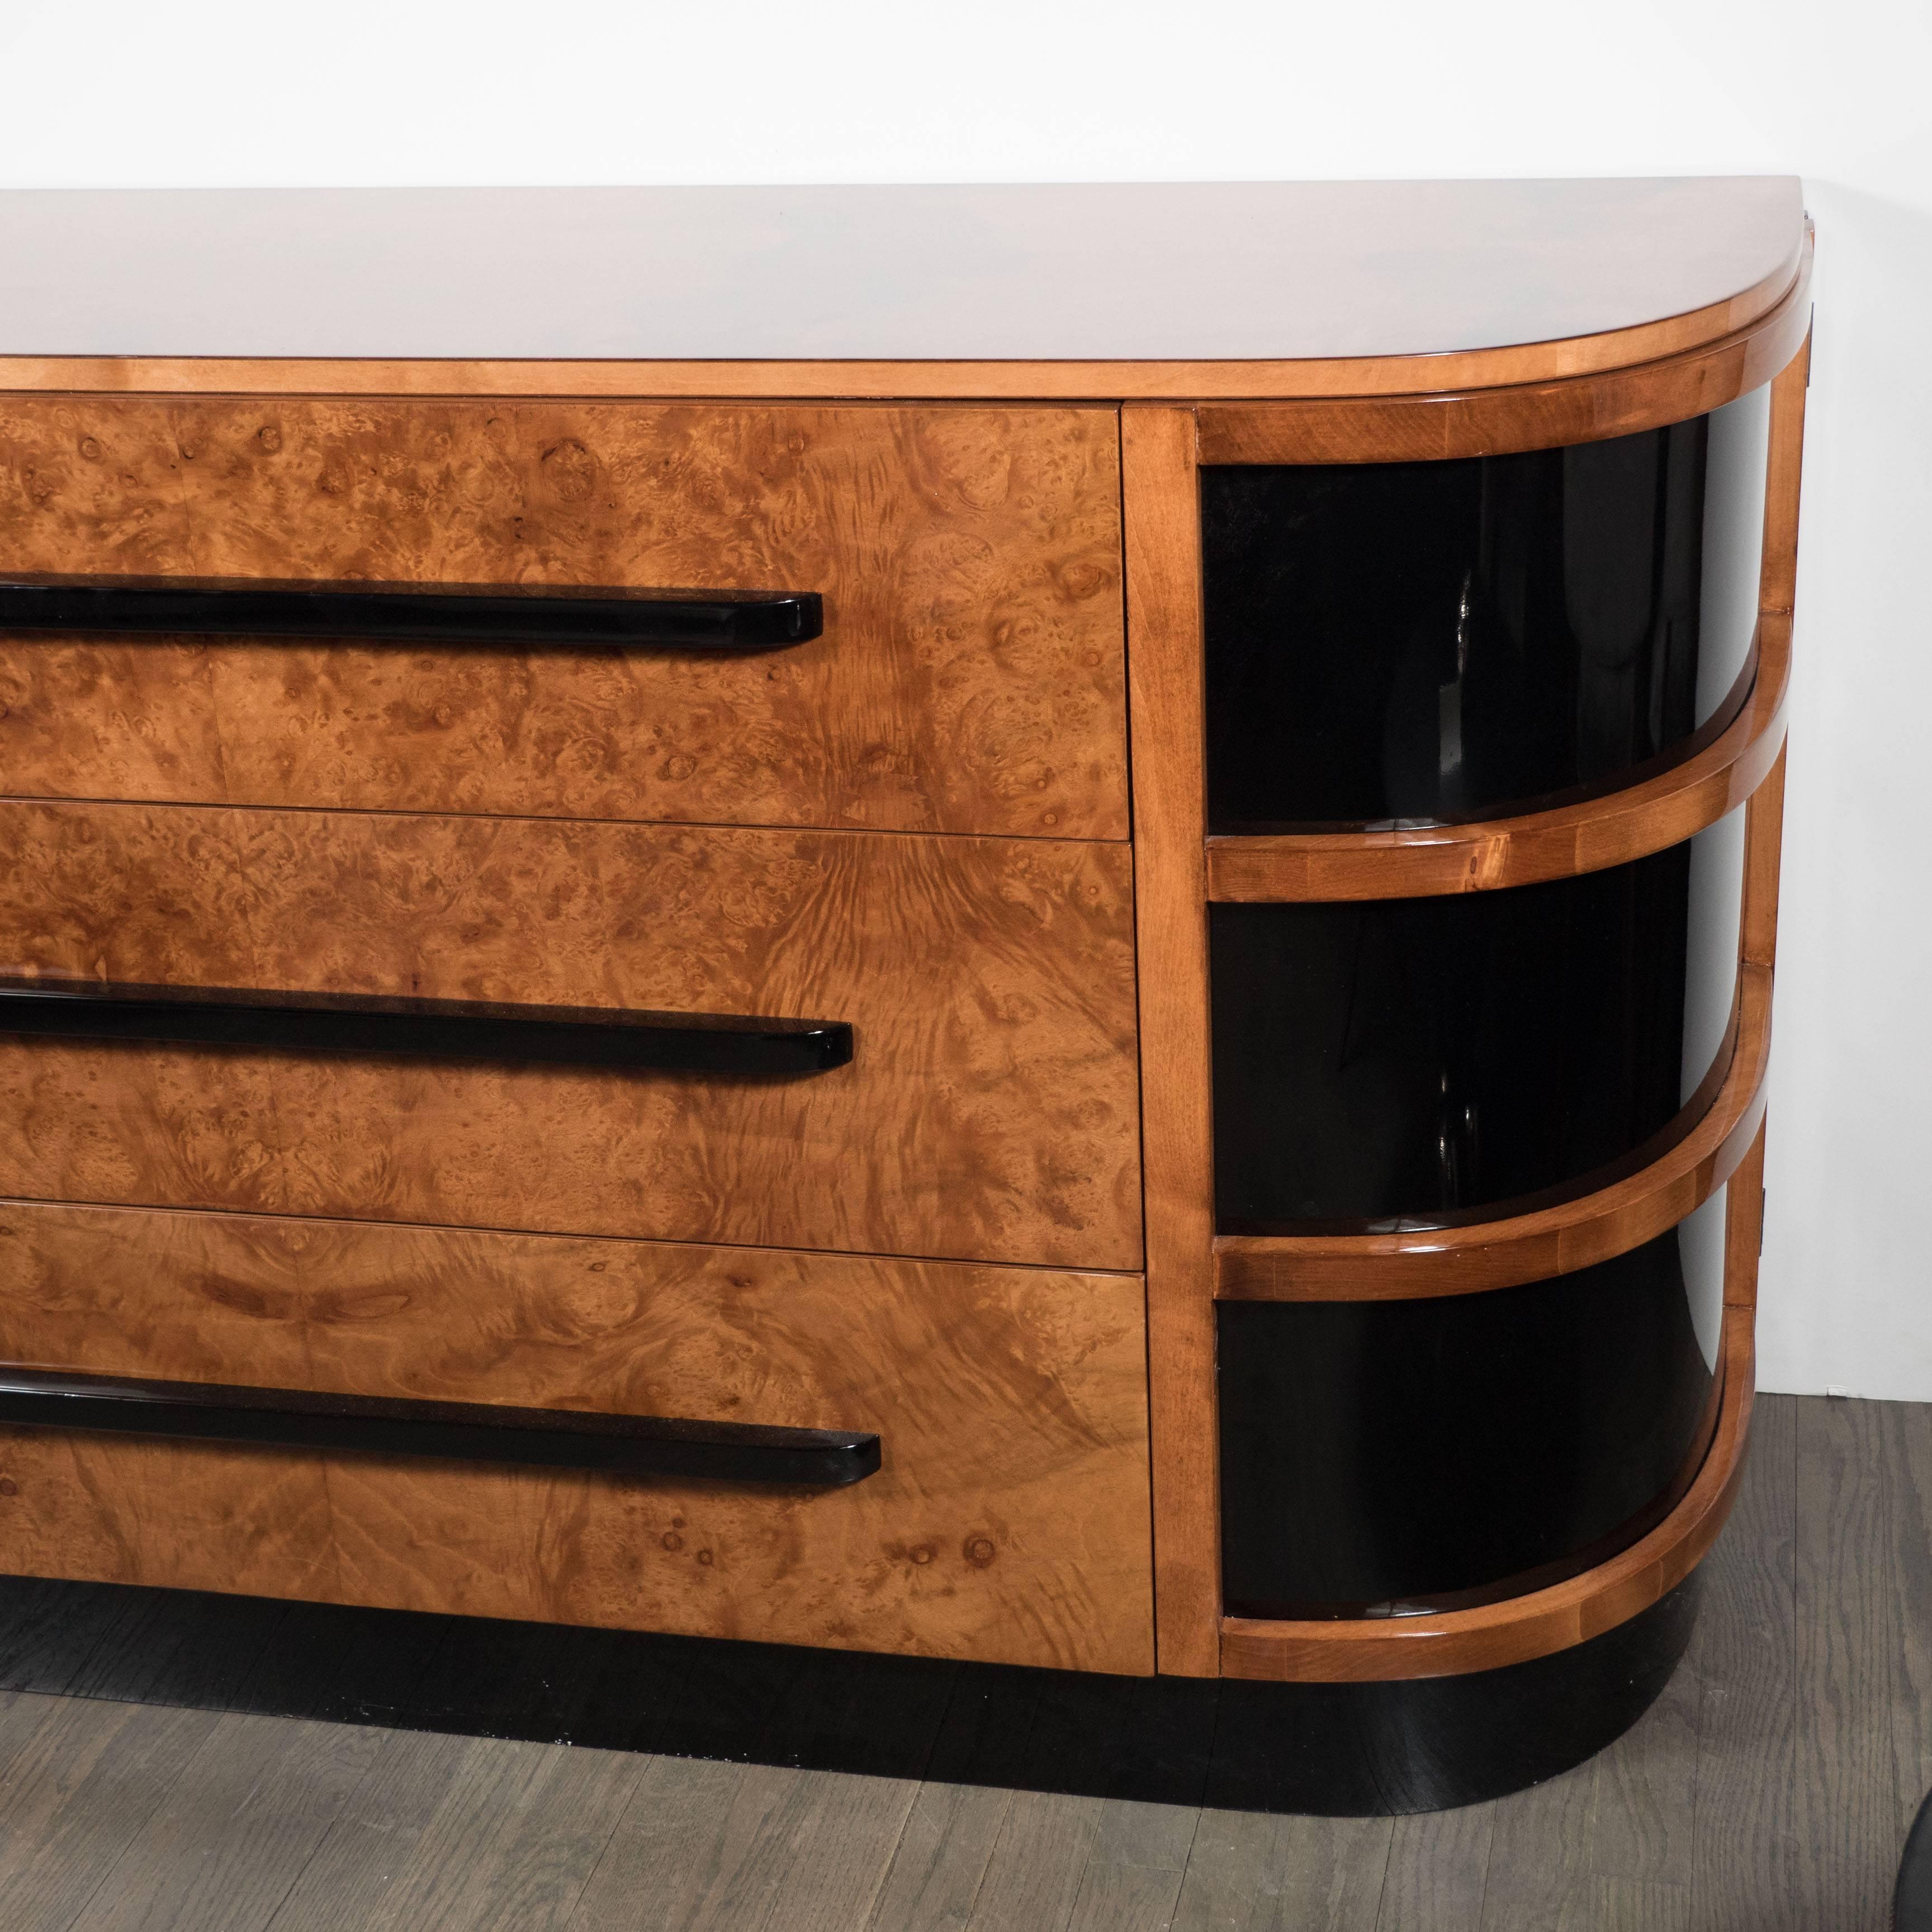 This is a really beautiful sideboard or console cabinet designed by Walter Darwin Teaque for Hastings Co. It is exotic book-matched burled walnut with black lacquer accents and polished aluminum trim. The finish is high gloss hand polished lacquer.